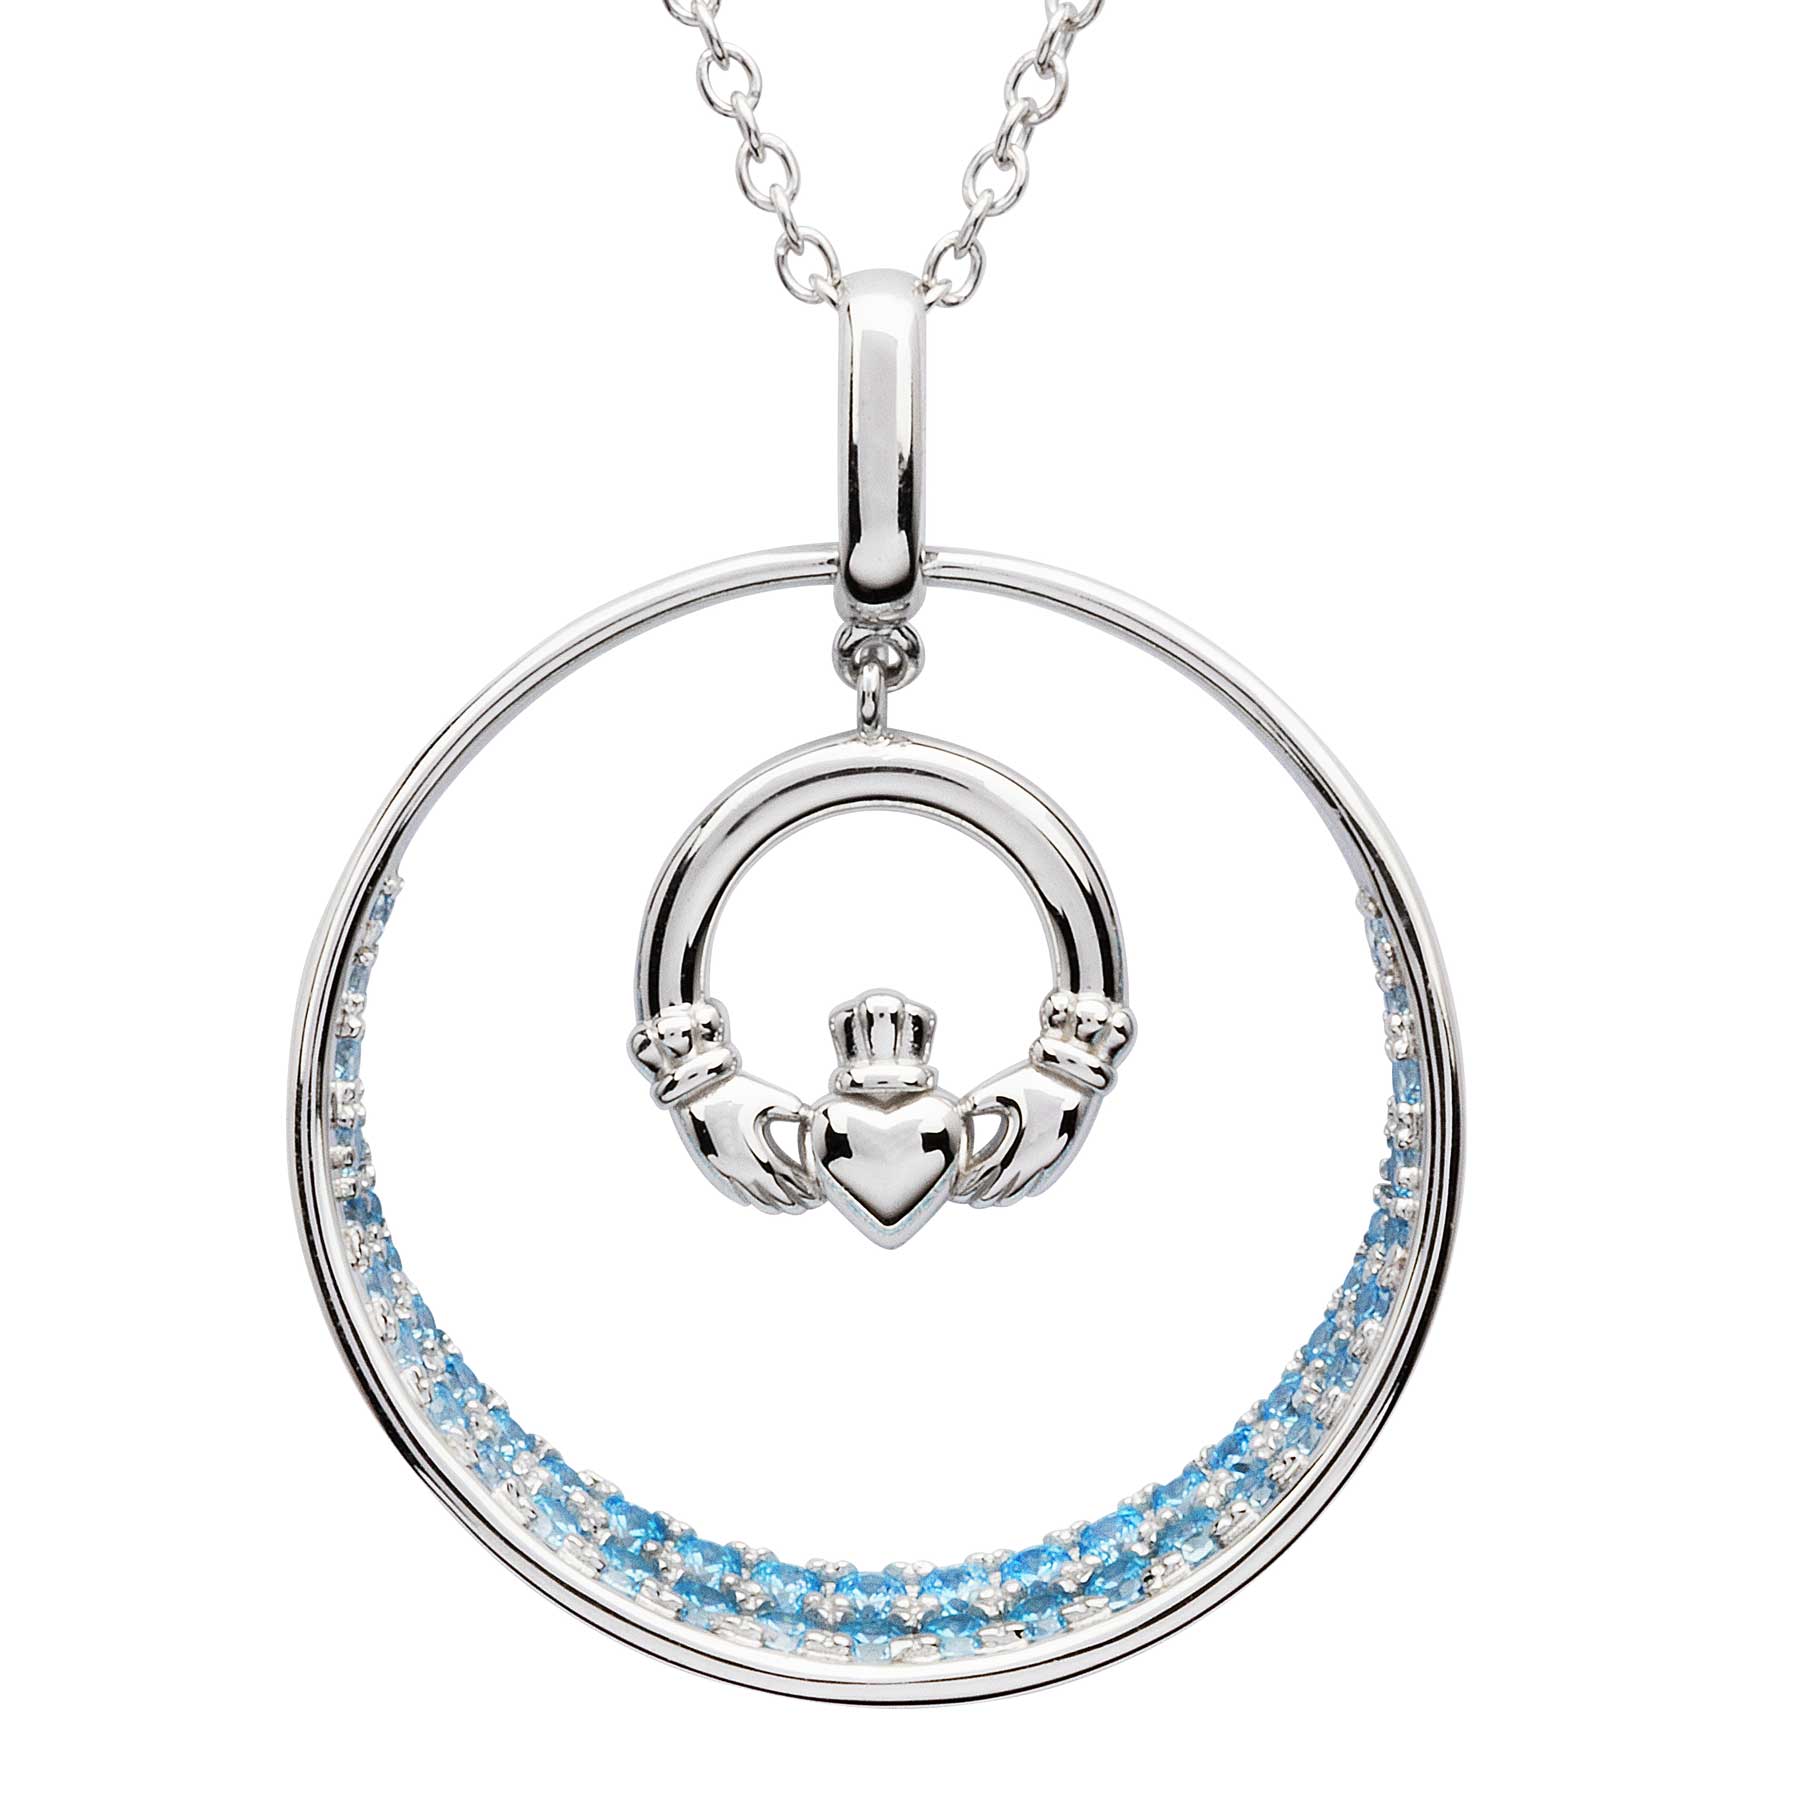 Product image for Irish Necklace | Sterling Silver & Aquamarine Claddagh Pendant